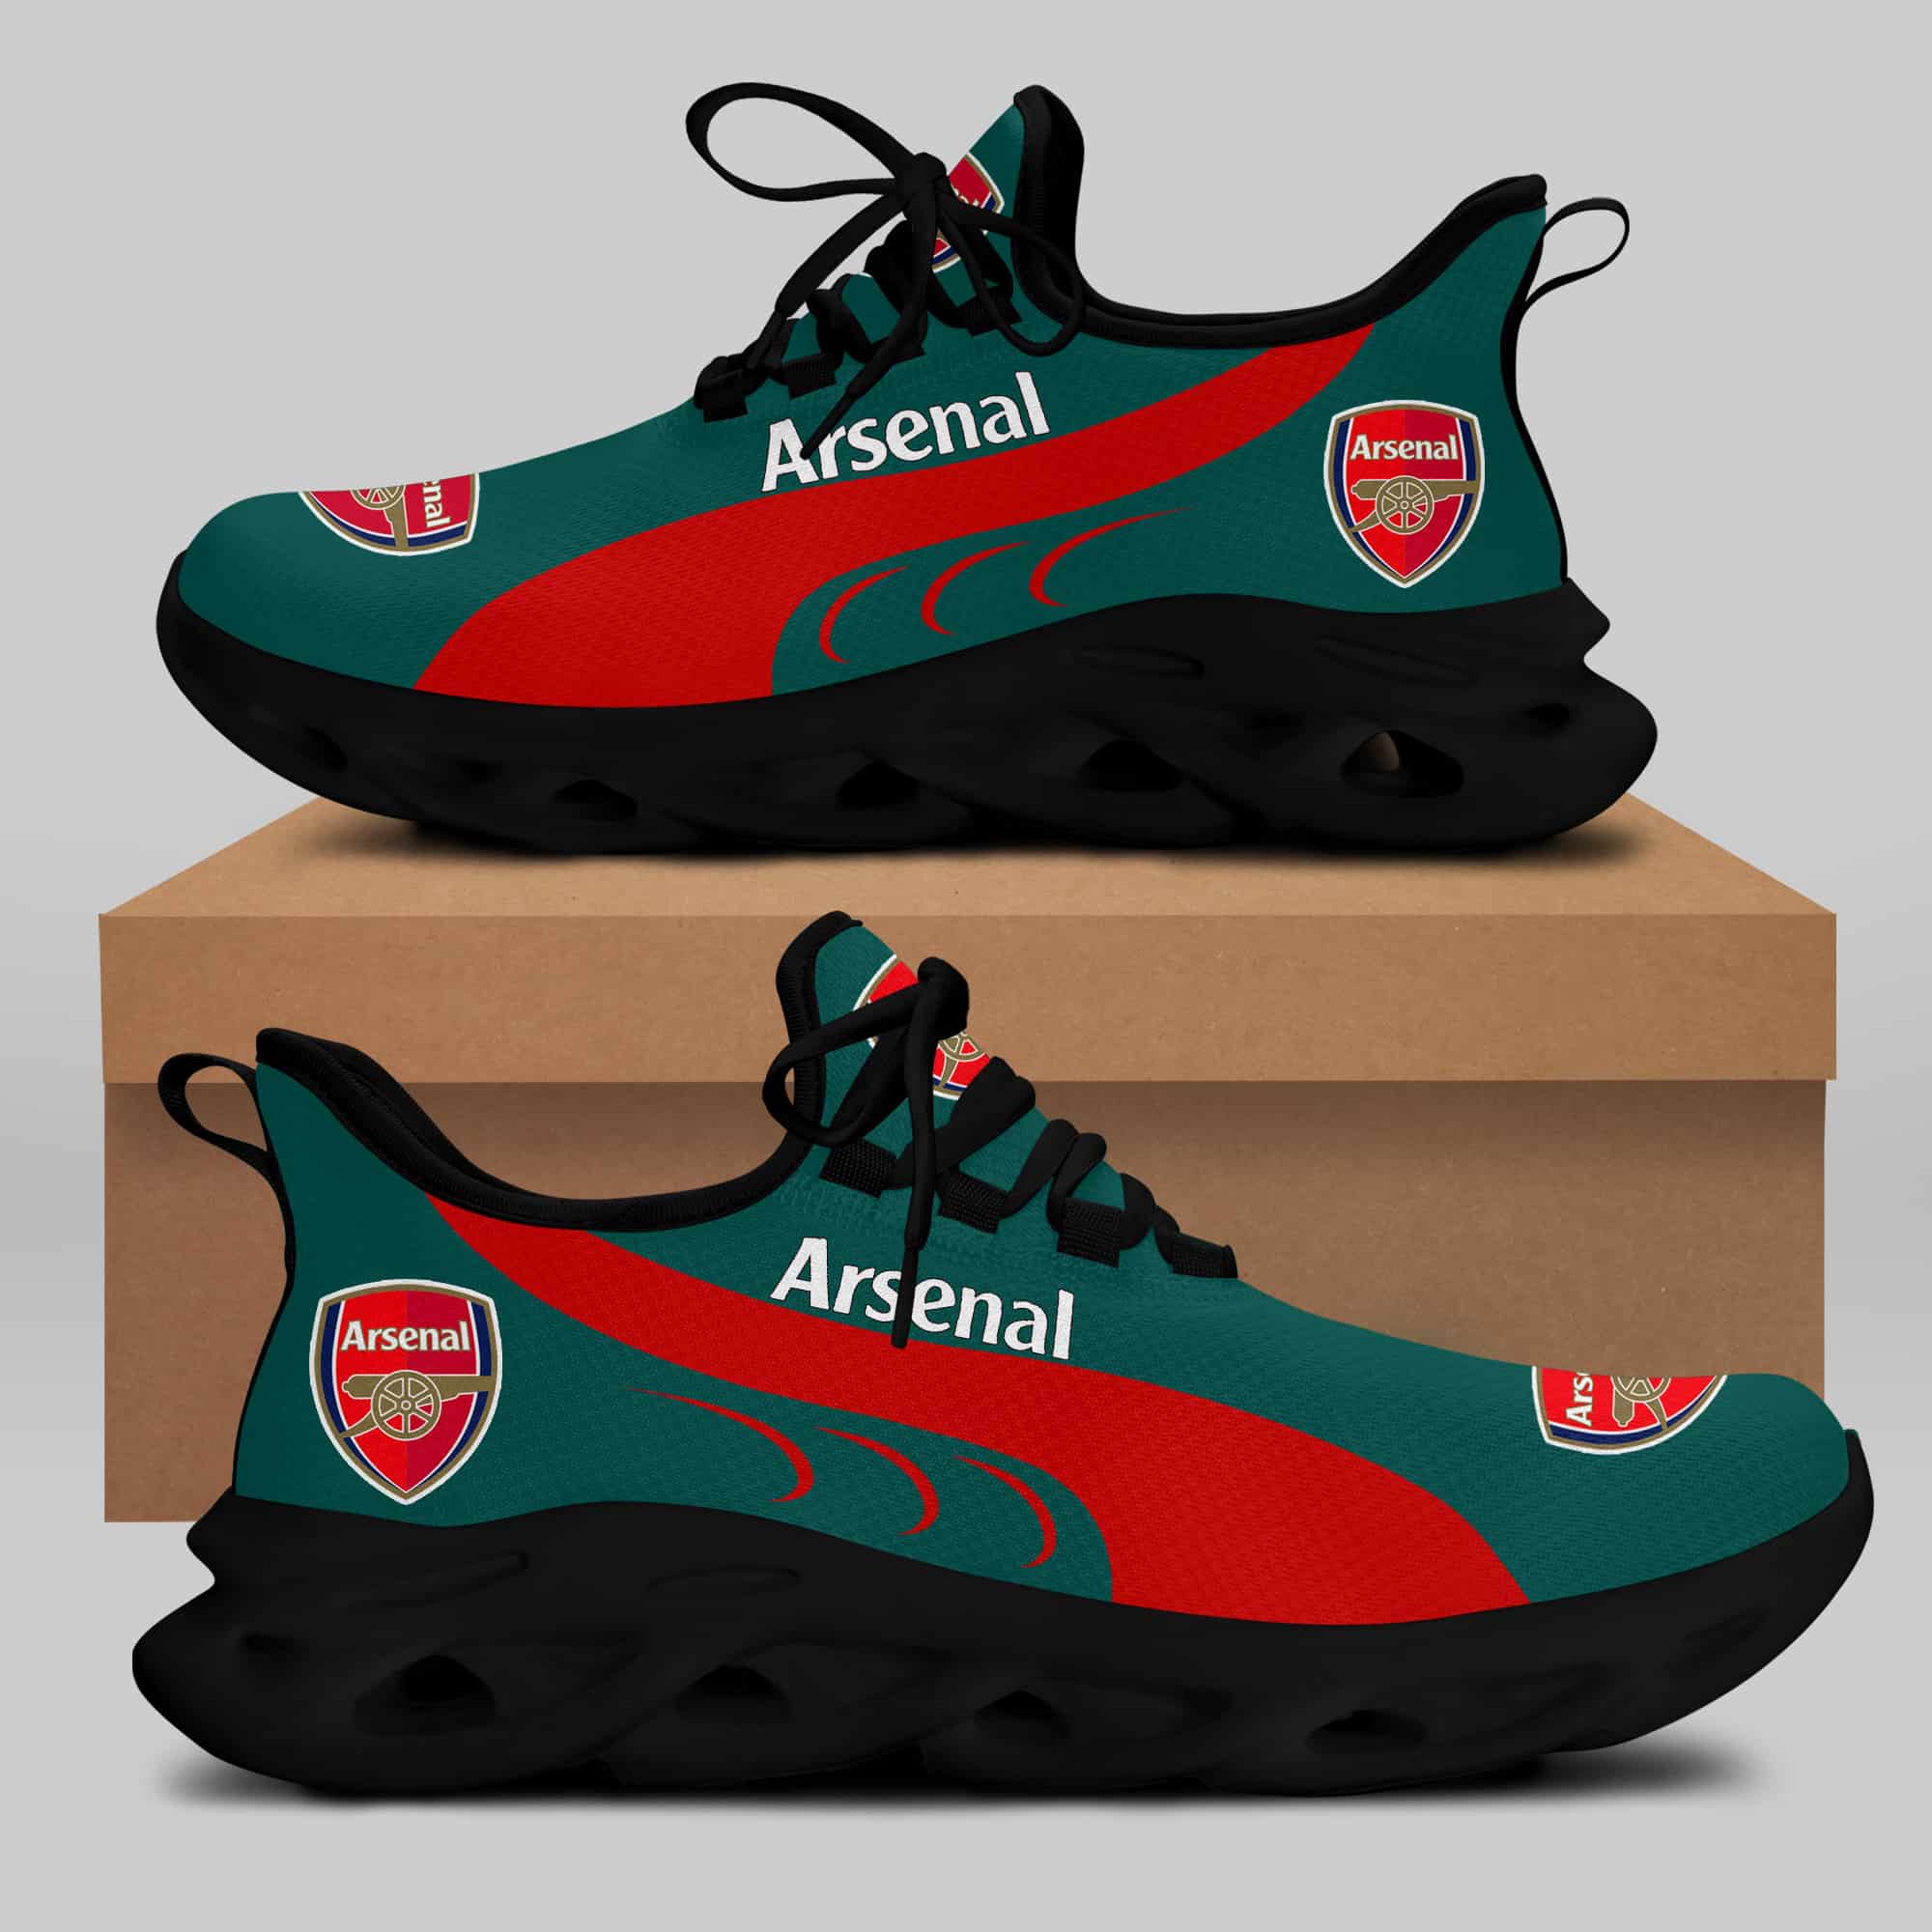 Arsenal Running Shoes Max Soul Shoes Sneakers Ver 5 1